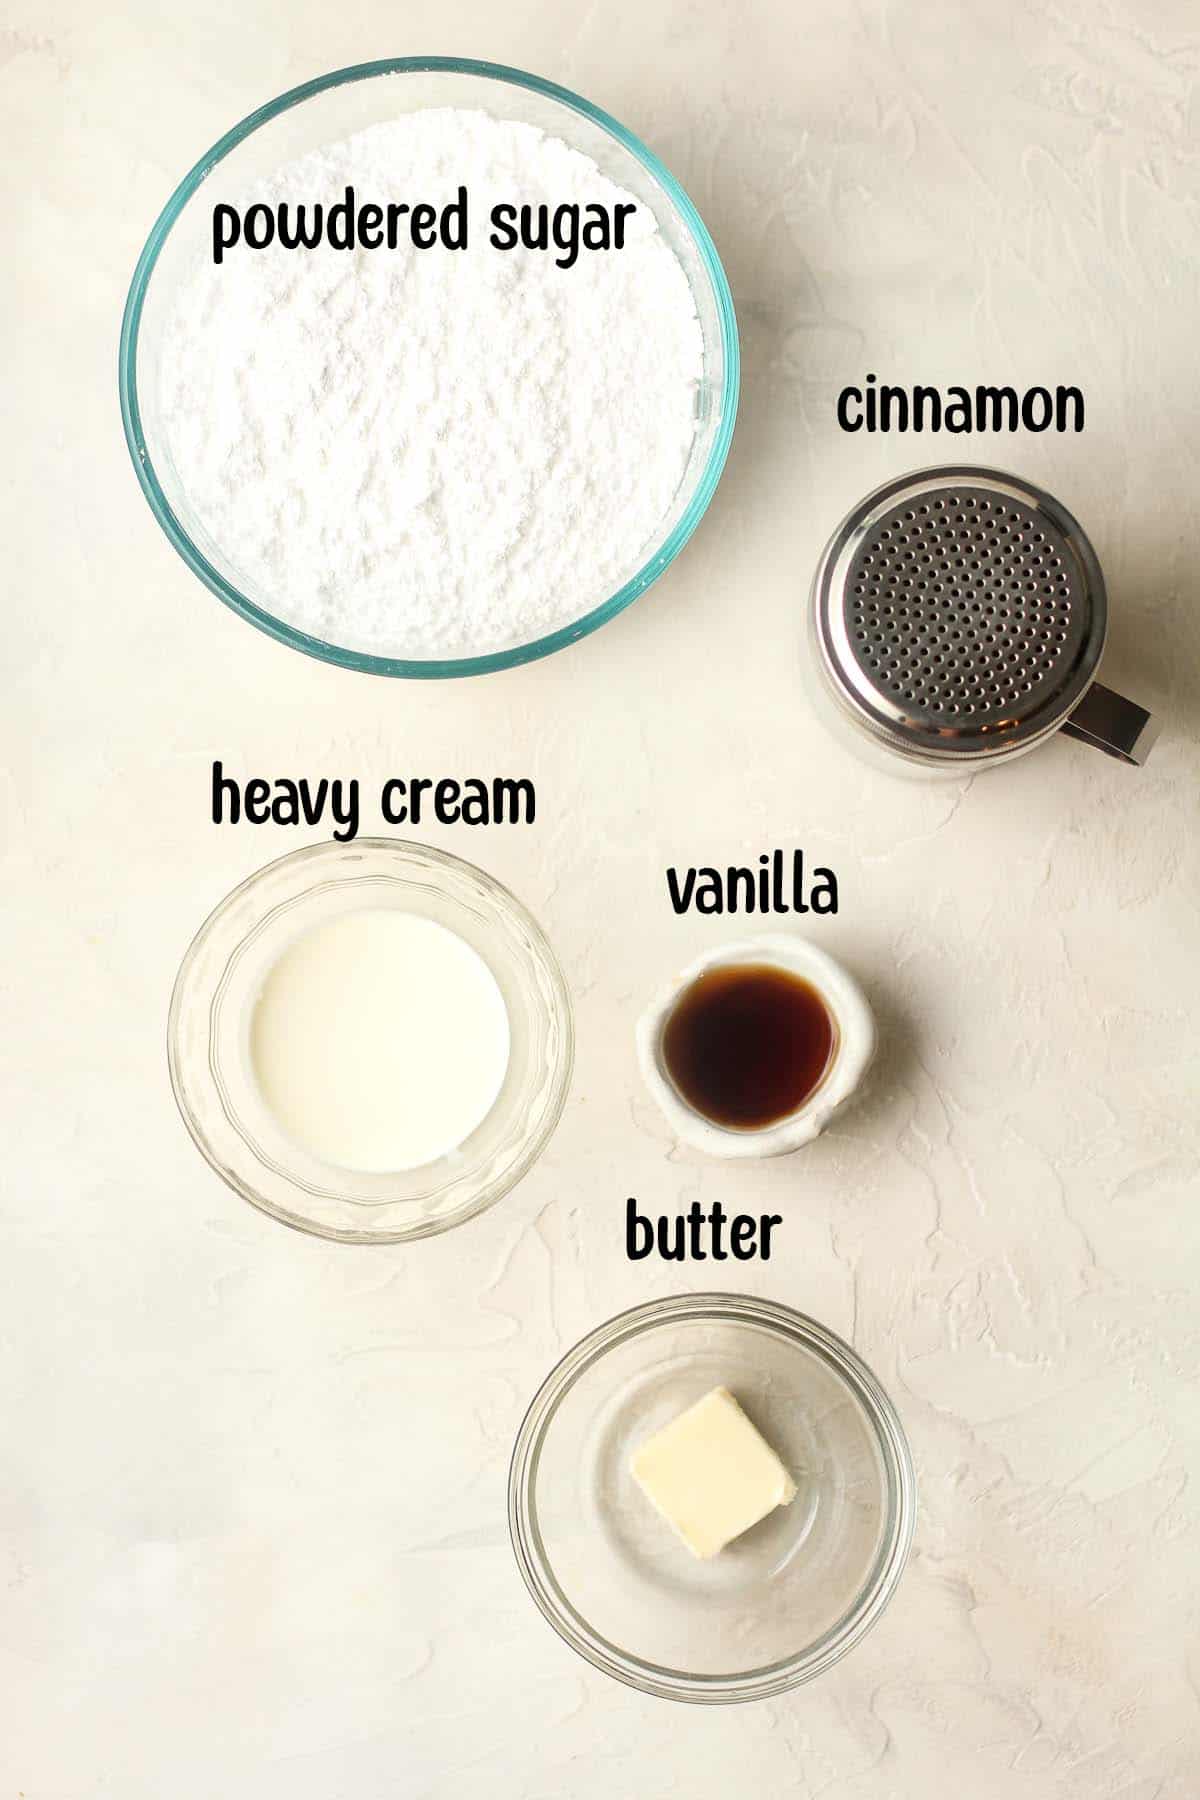 The icing ingredients with labels.